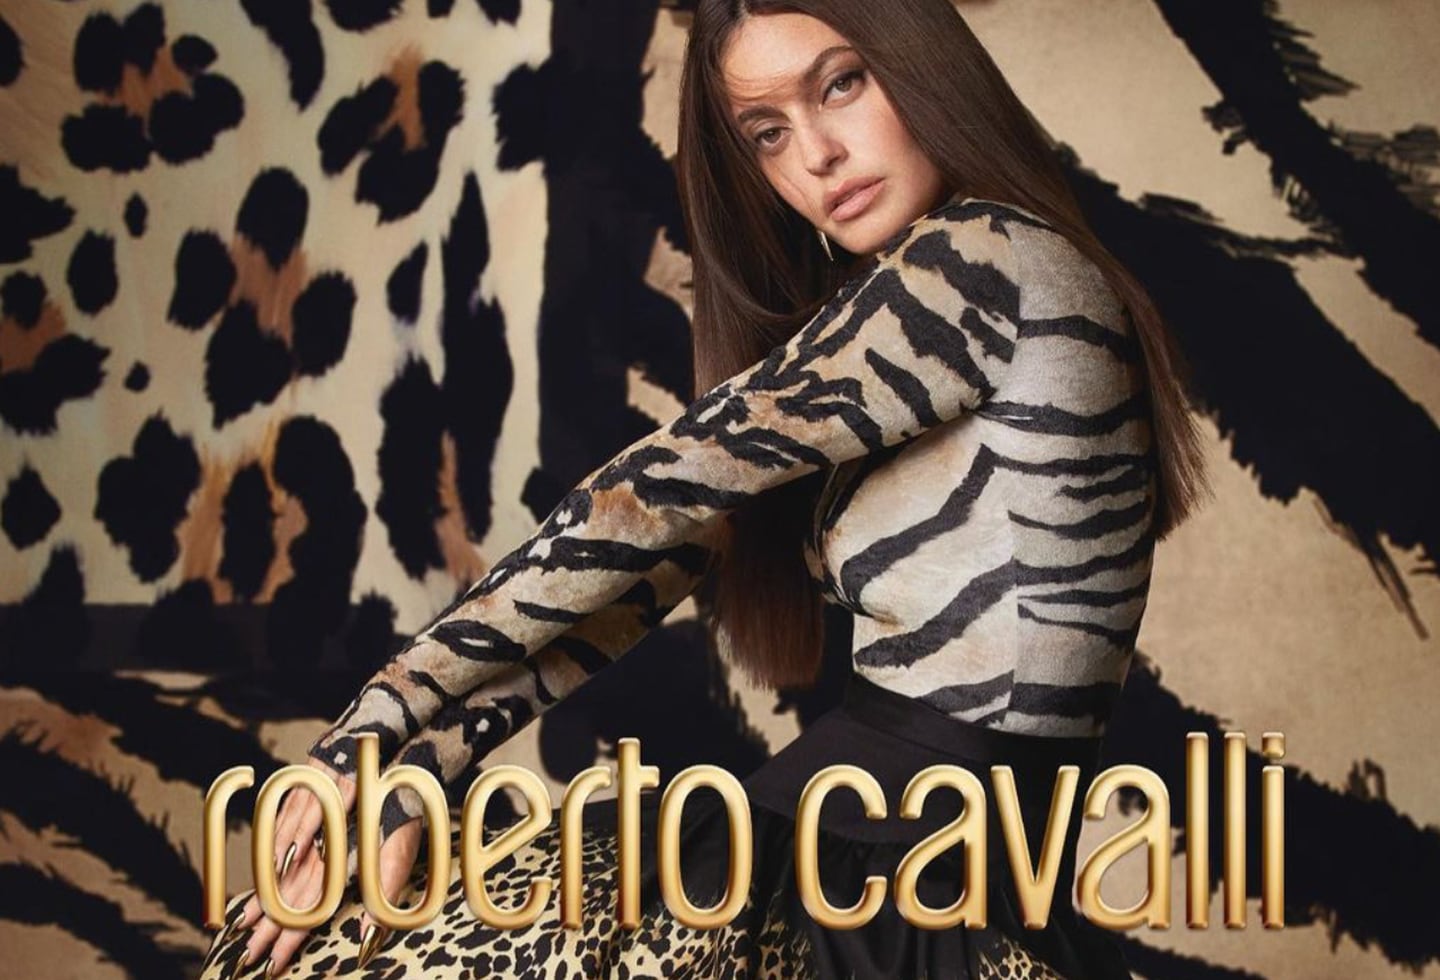 Karen Wazen is fronting a new global fragrance campaign for Roberto Cavalli.